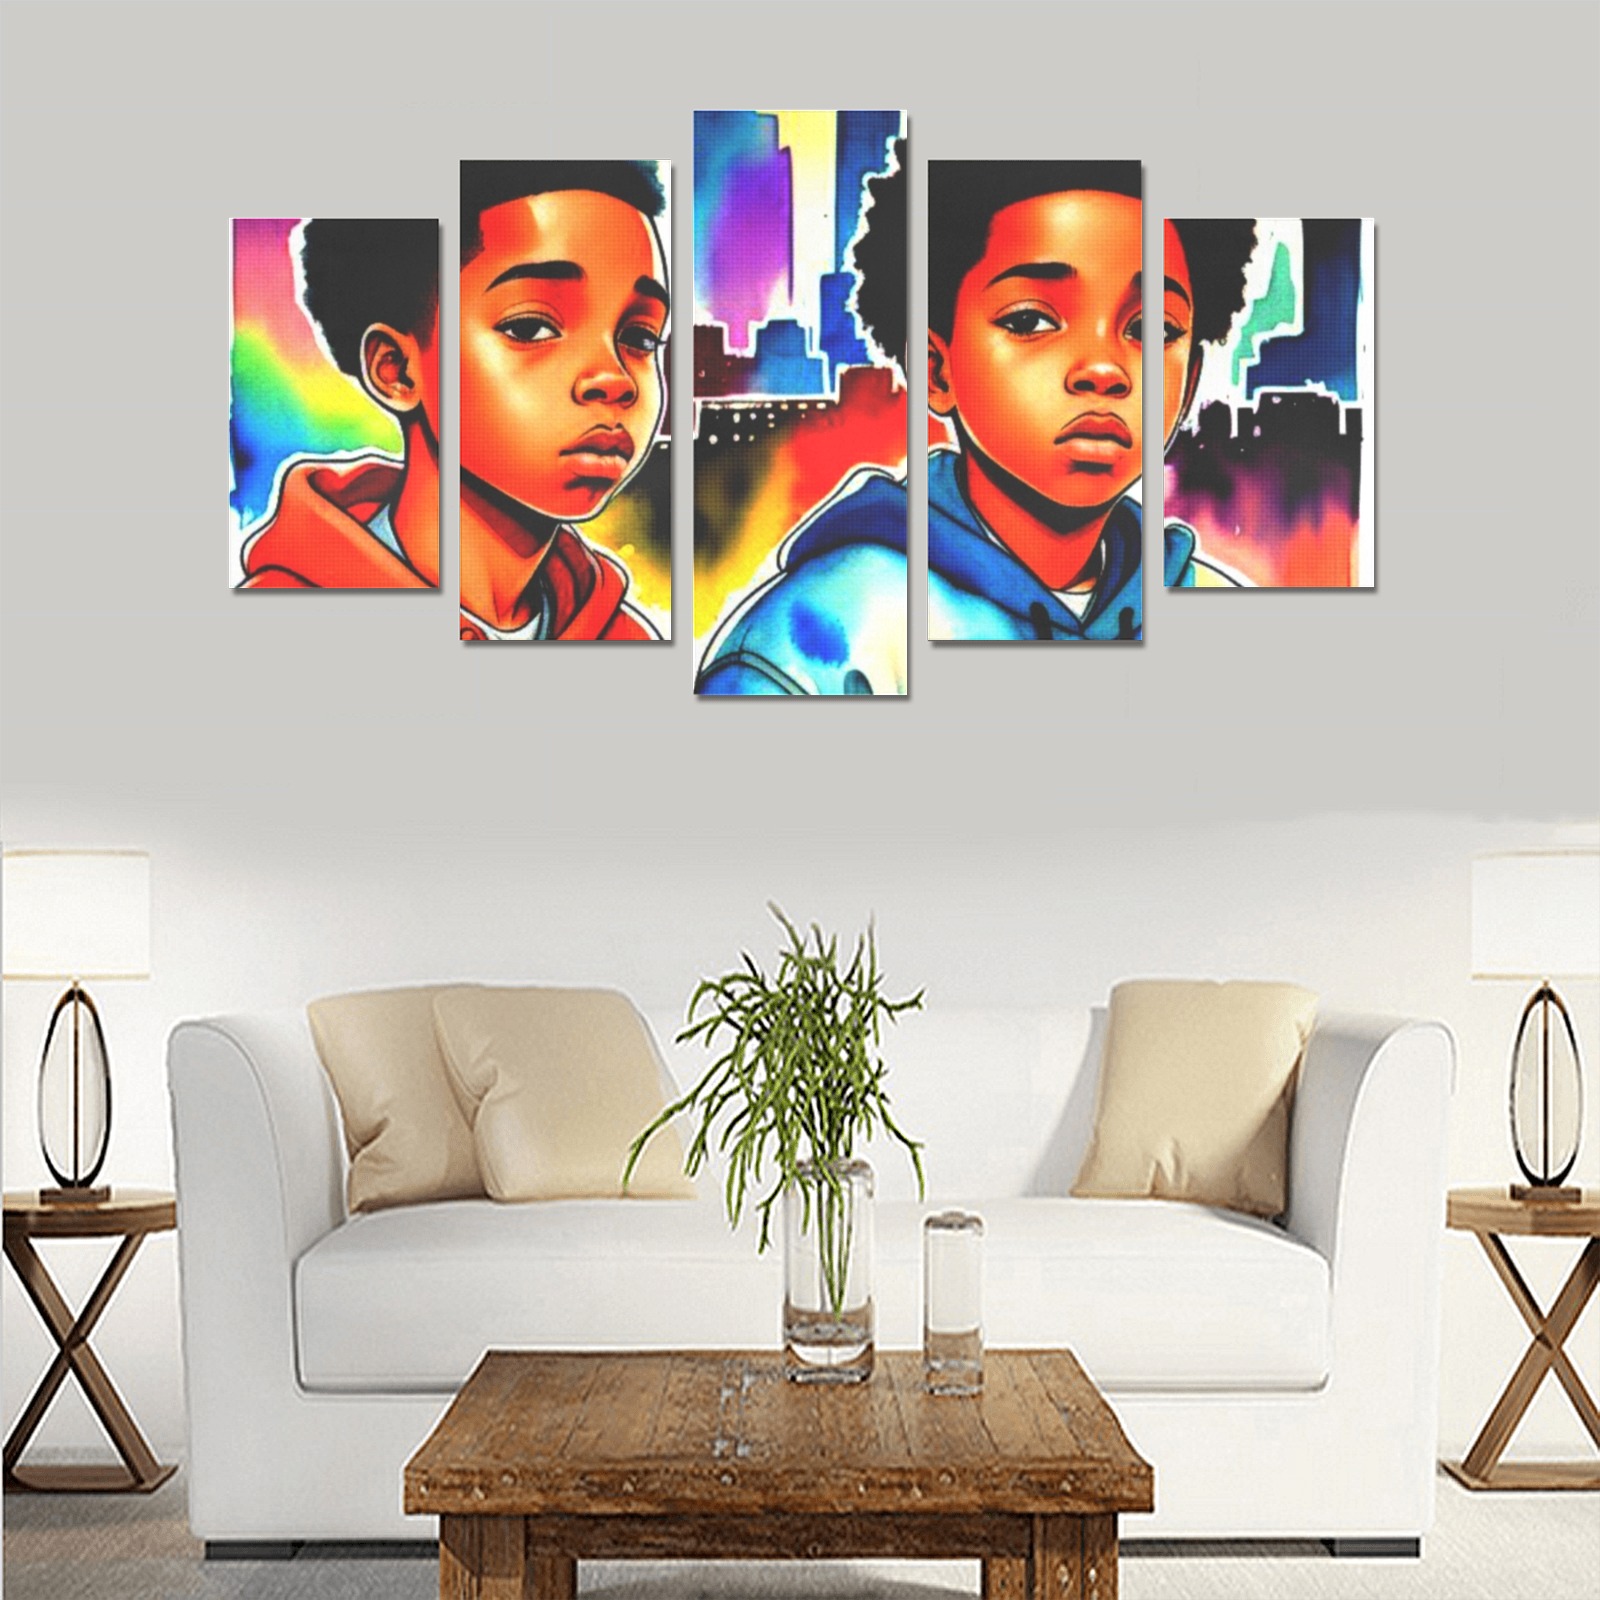 KIDS IN AMERICA 2 Canvas Print Sets A (No Frame)